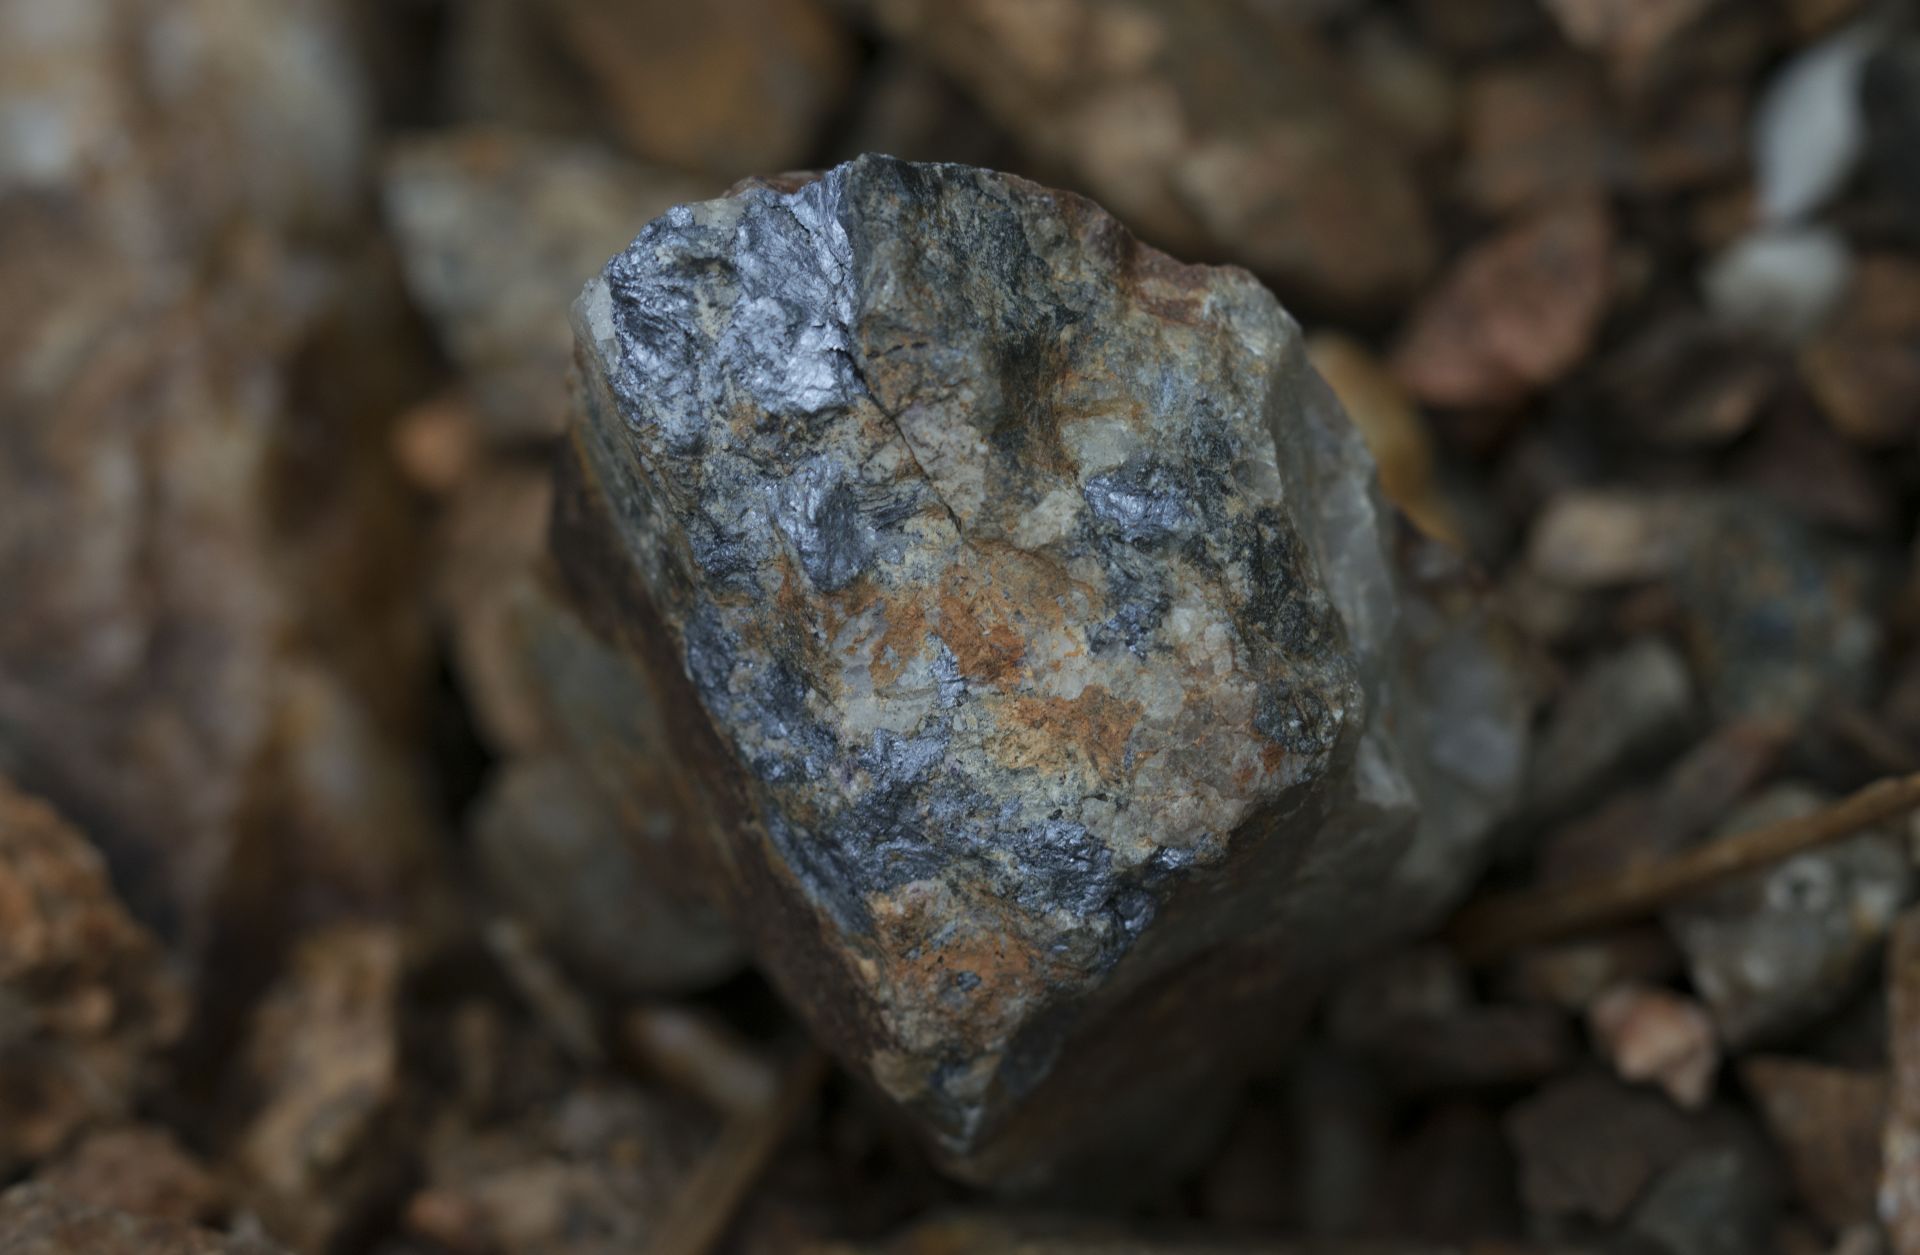 Dark colored mineral Molybdenite and the metal contained within the mineral called Molybdenum.